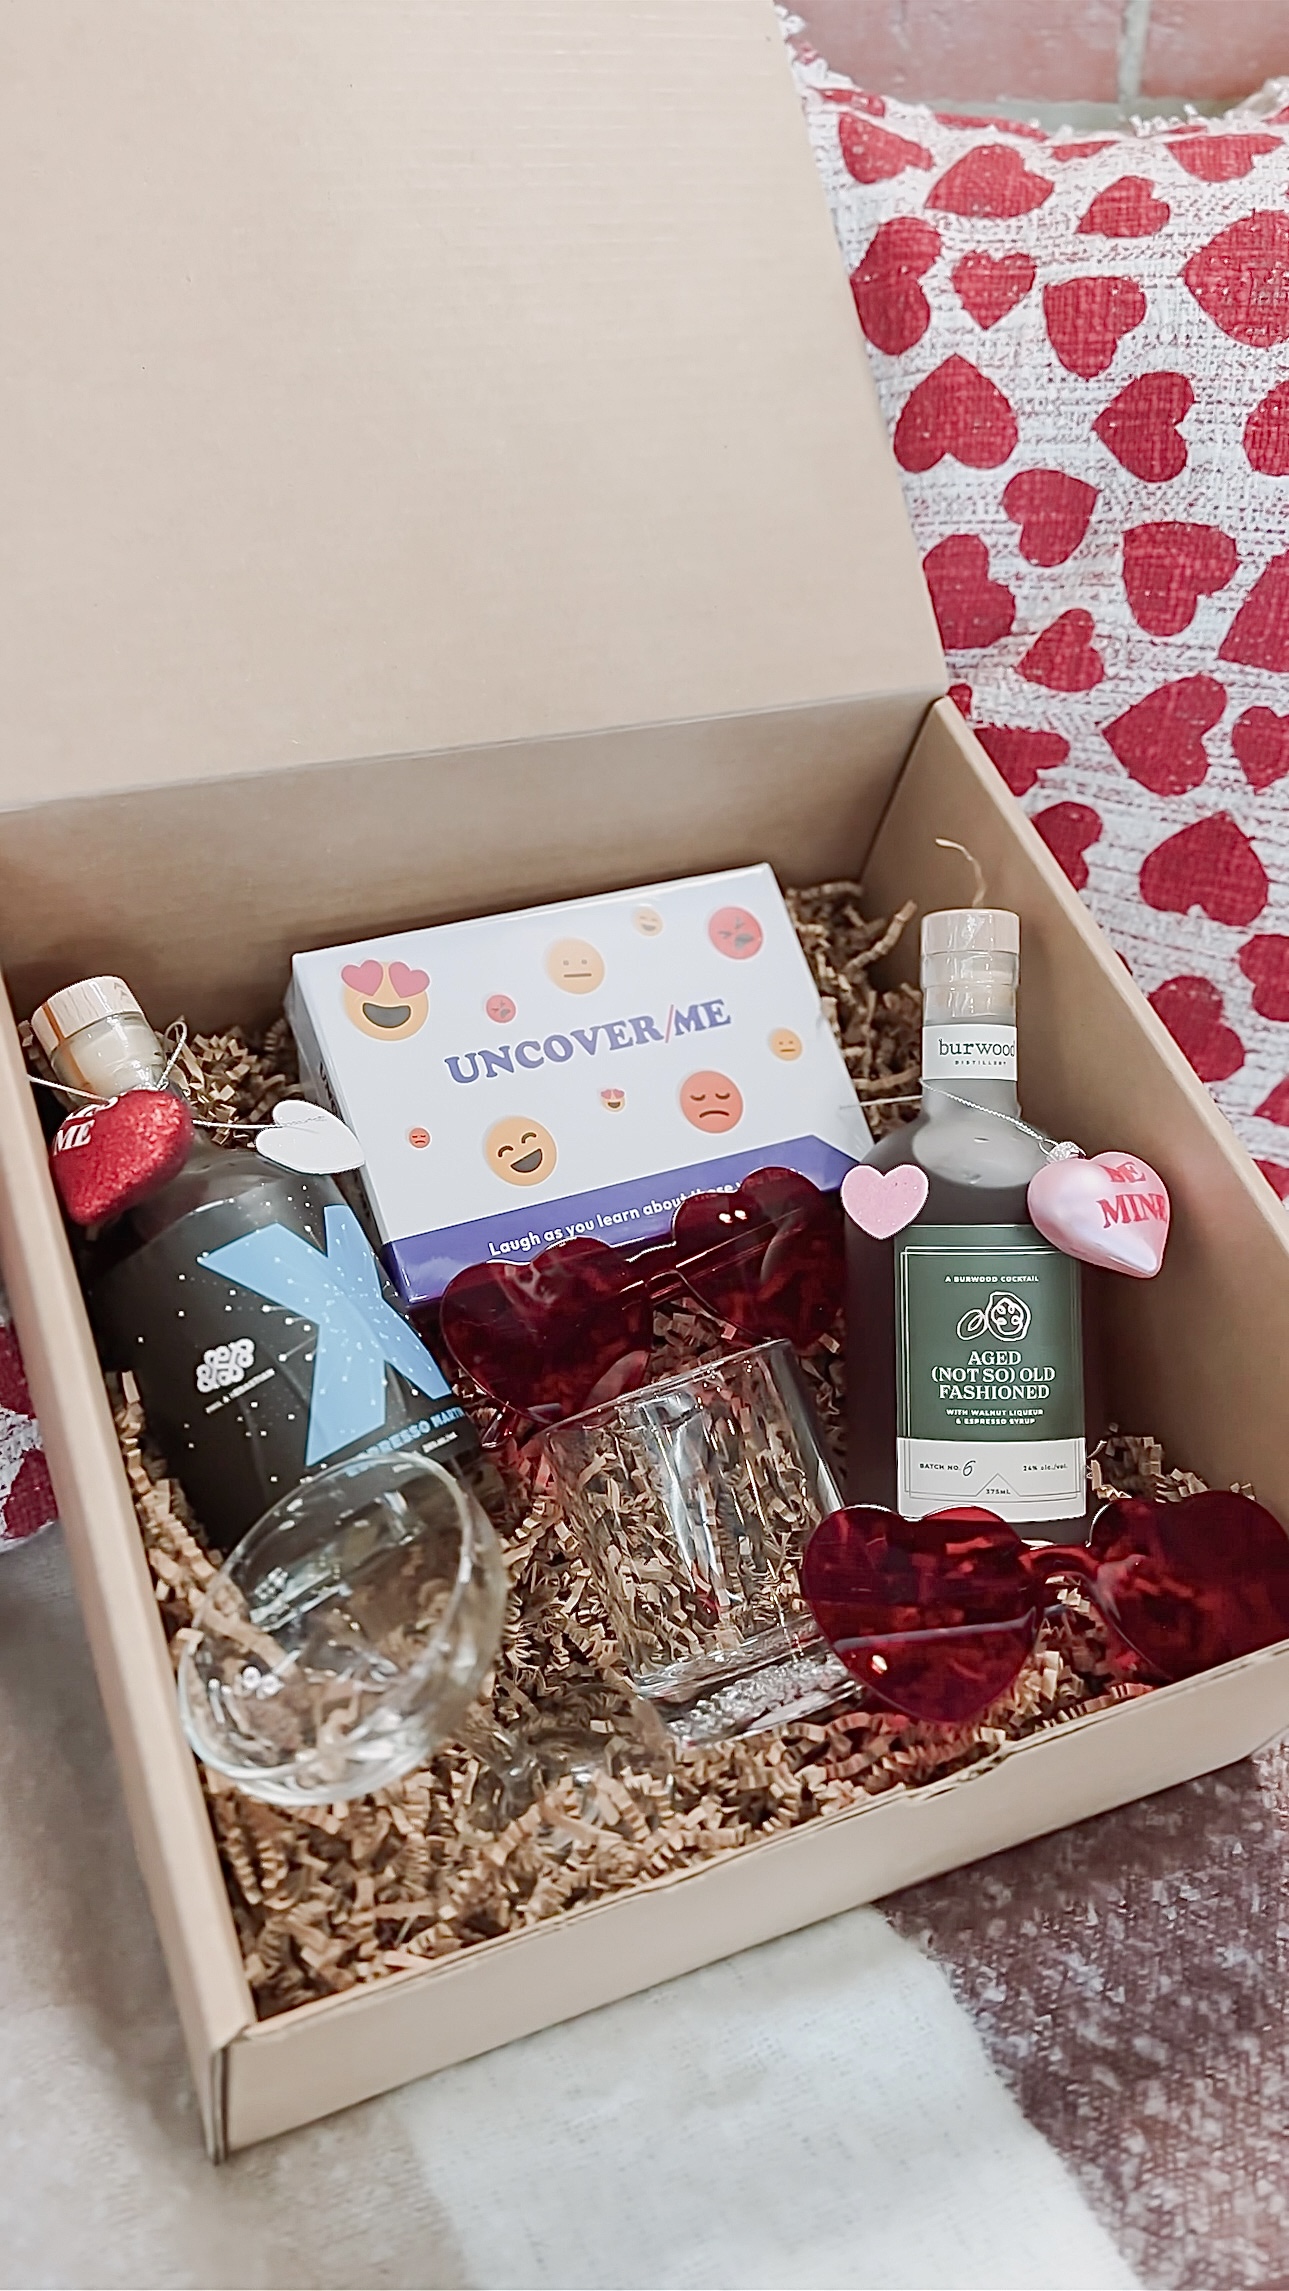 Valentines Day: Date in a Box Cocktail Kit with Famous Espresso Martini and Aged (not so) Old Fashioned Premixed Cocktails | Burwood Distillery